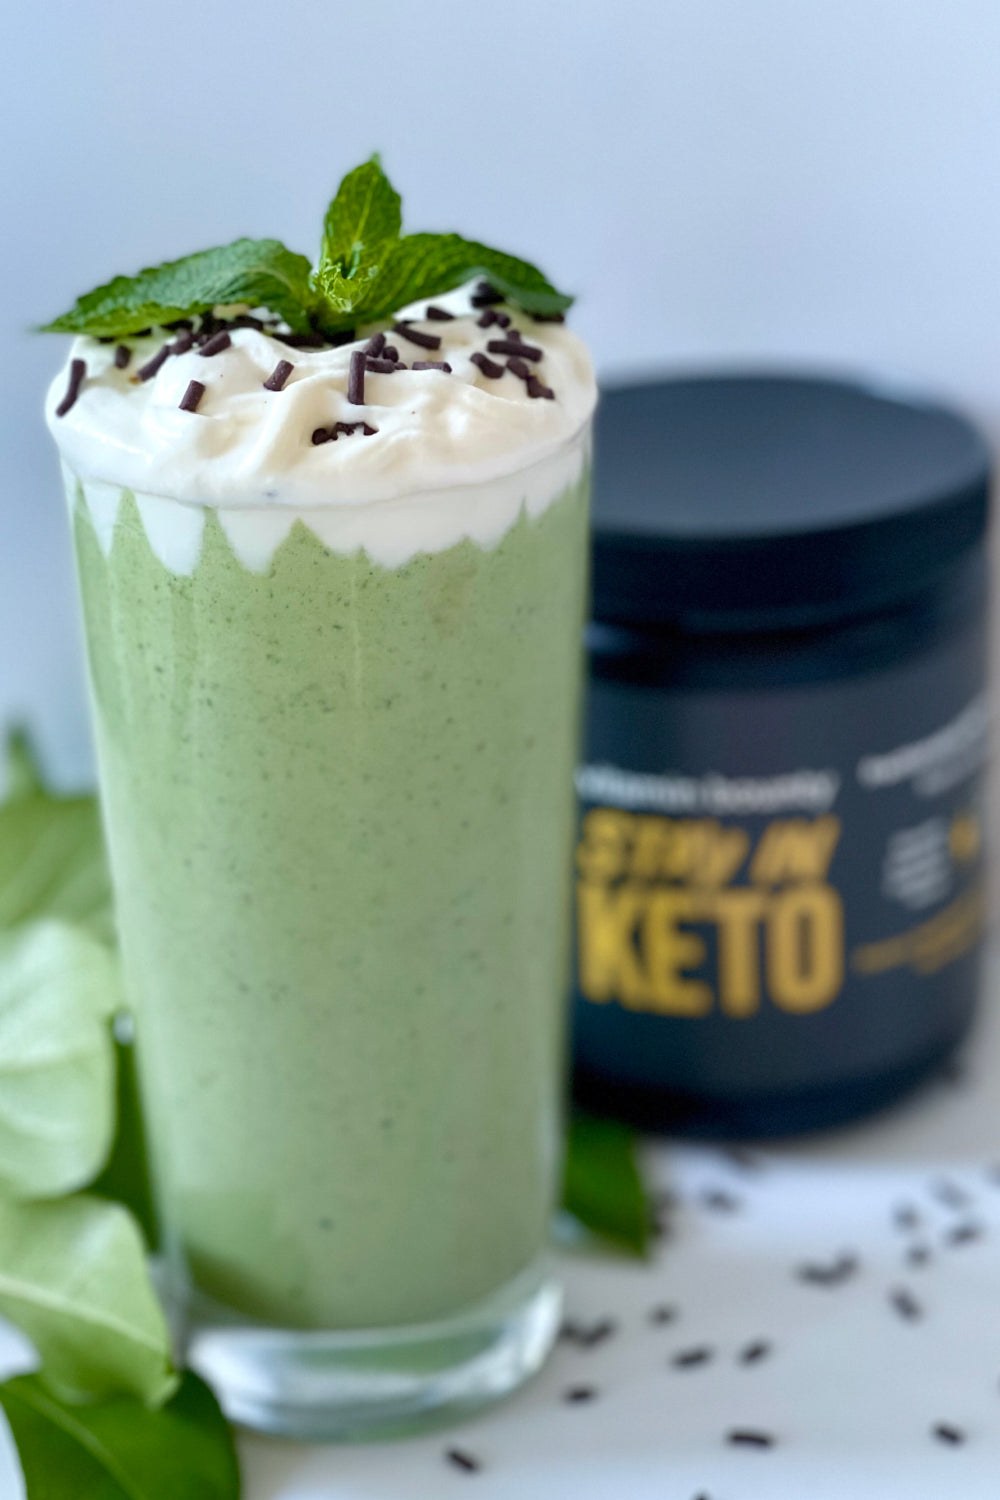 Green milkshake with whipped cream and chocolate sprinkles. Made with Stay in Keto by Vitamin Bounty